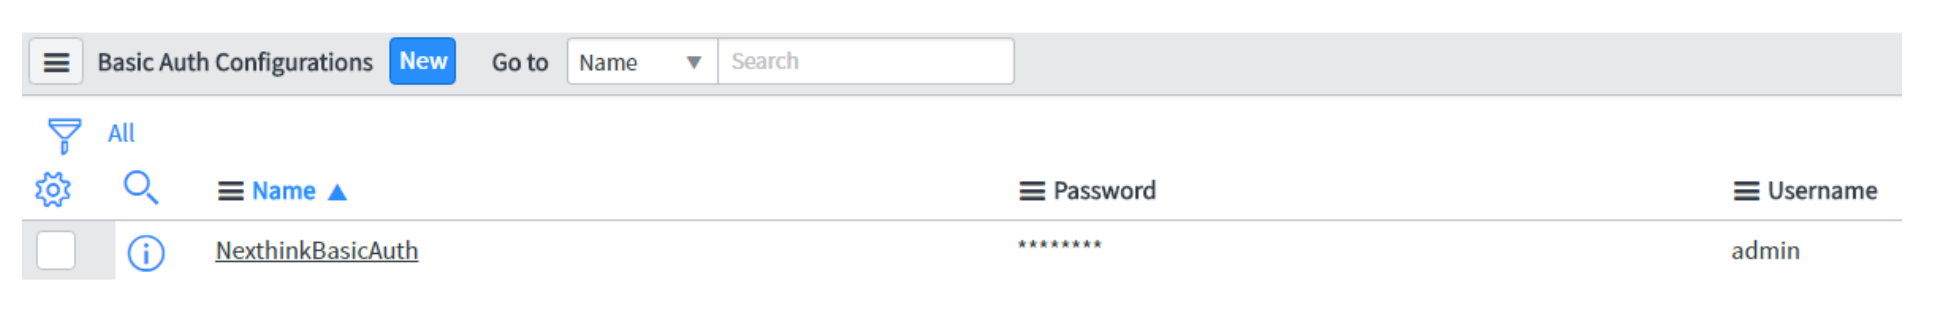 Example of authentication profile defined for the integration